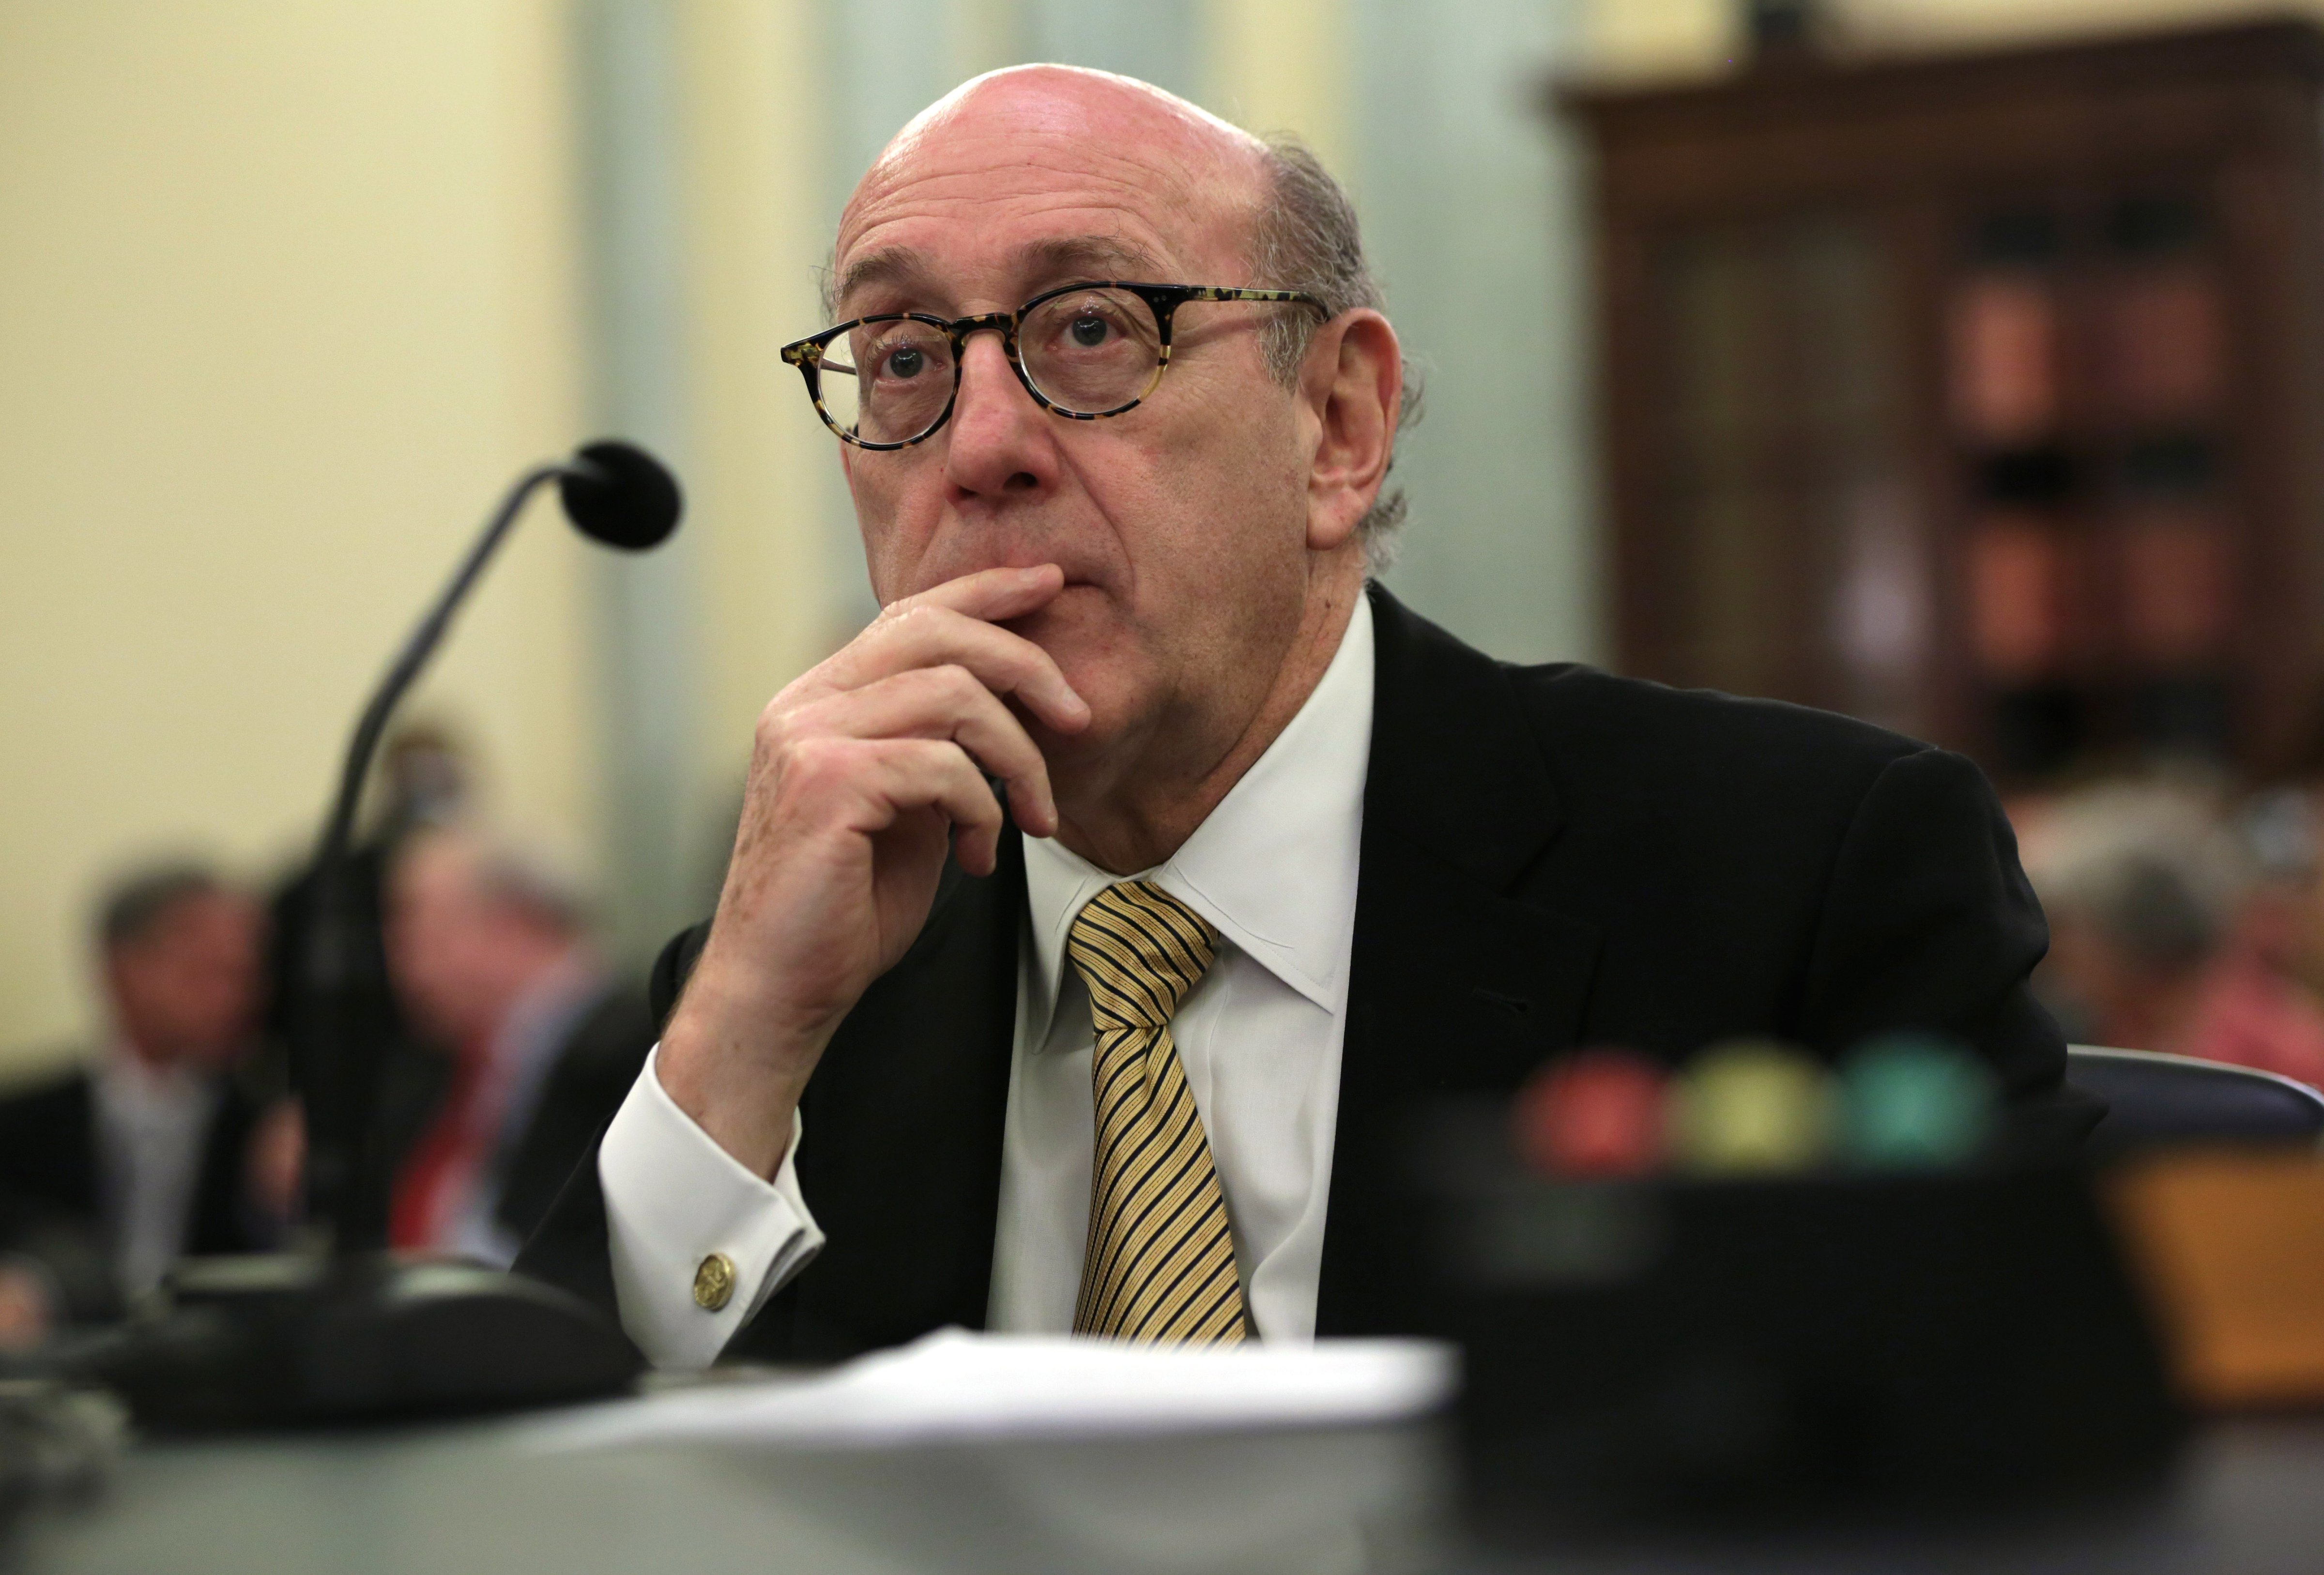 Attorney Kenneth Feinberg testifies during a hearing before the Consumer Protection, Product Safety, and Insurance Subcommittee of the Senate Commerce, Science and Transportation Committee July 17, 2014 on Capitol Hill in Washington, DC. The subcommittee held hearing on "Examining Accountability and Corporate Culture in Wake of the GM Recalls." (Alex Wong—Getty Images)